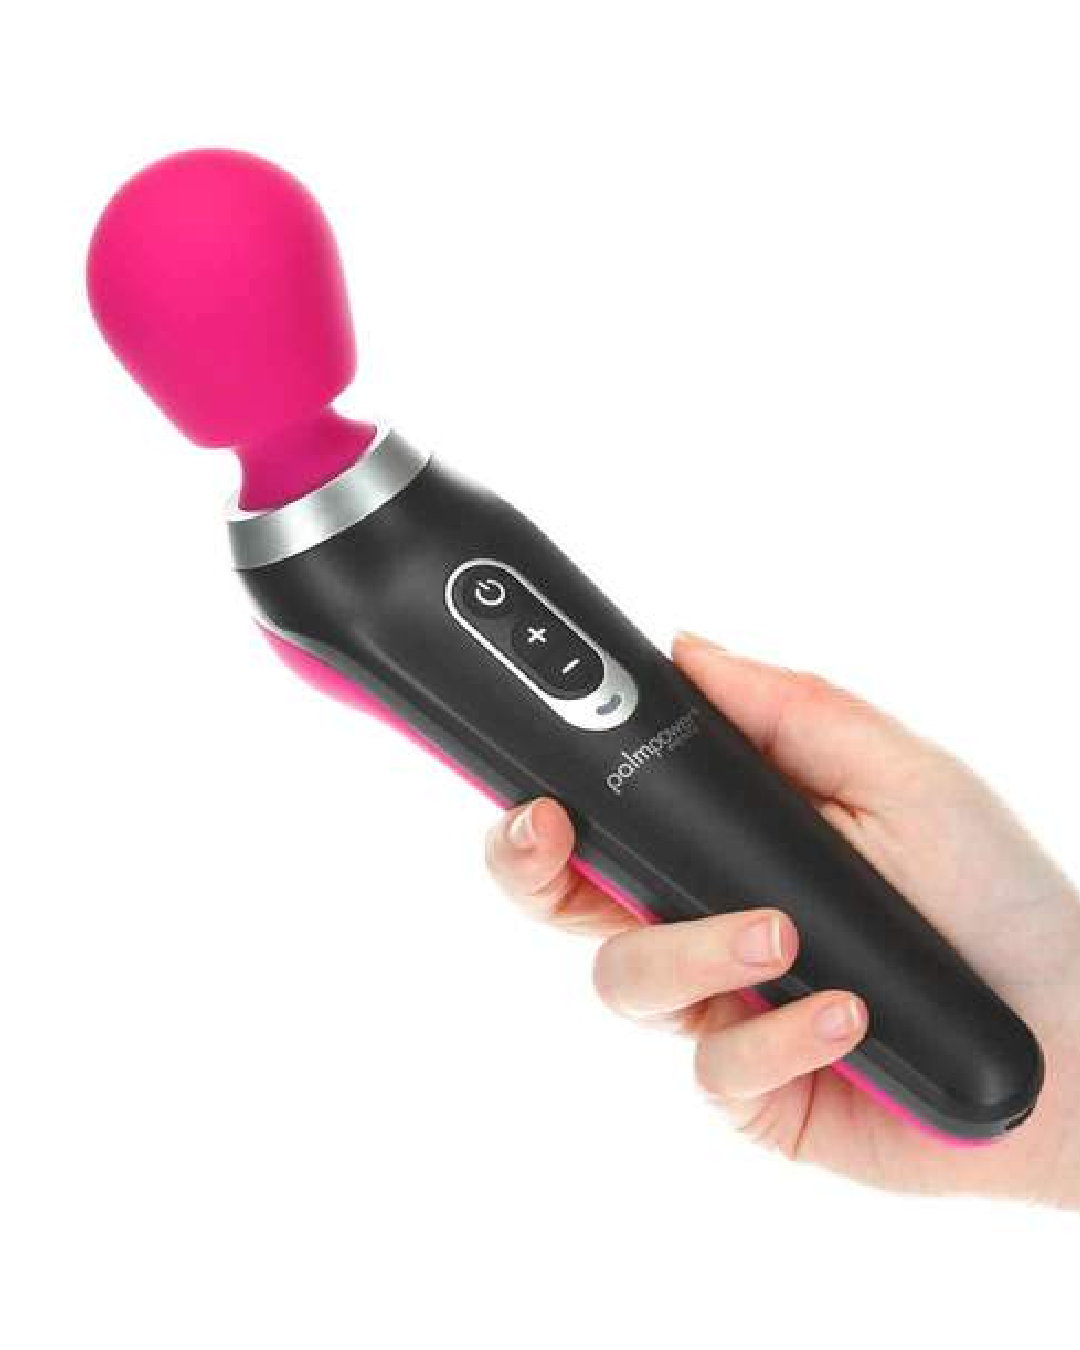 Palm Power Extreme Wand Vibrator  - Pink held in a hand